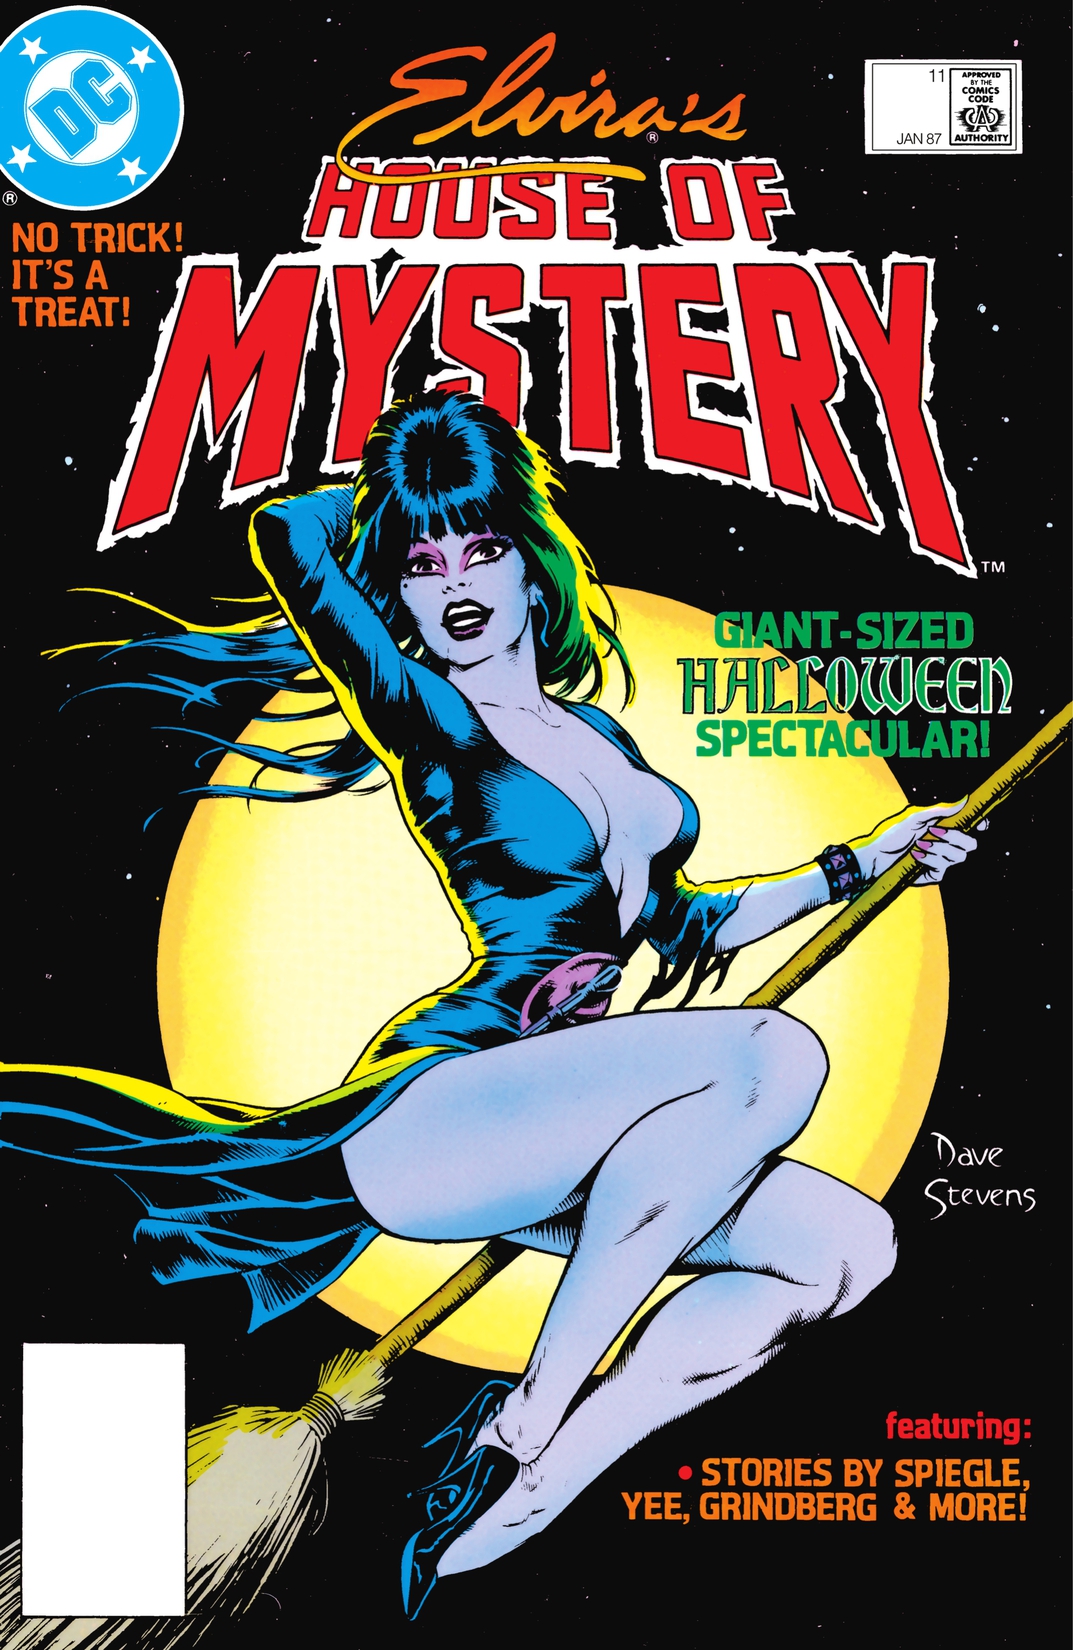 Elvira's House of Mystery #11 preview images